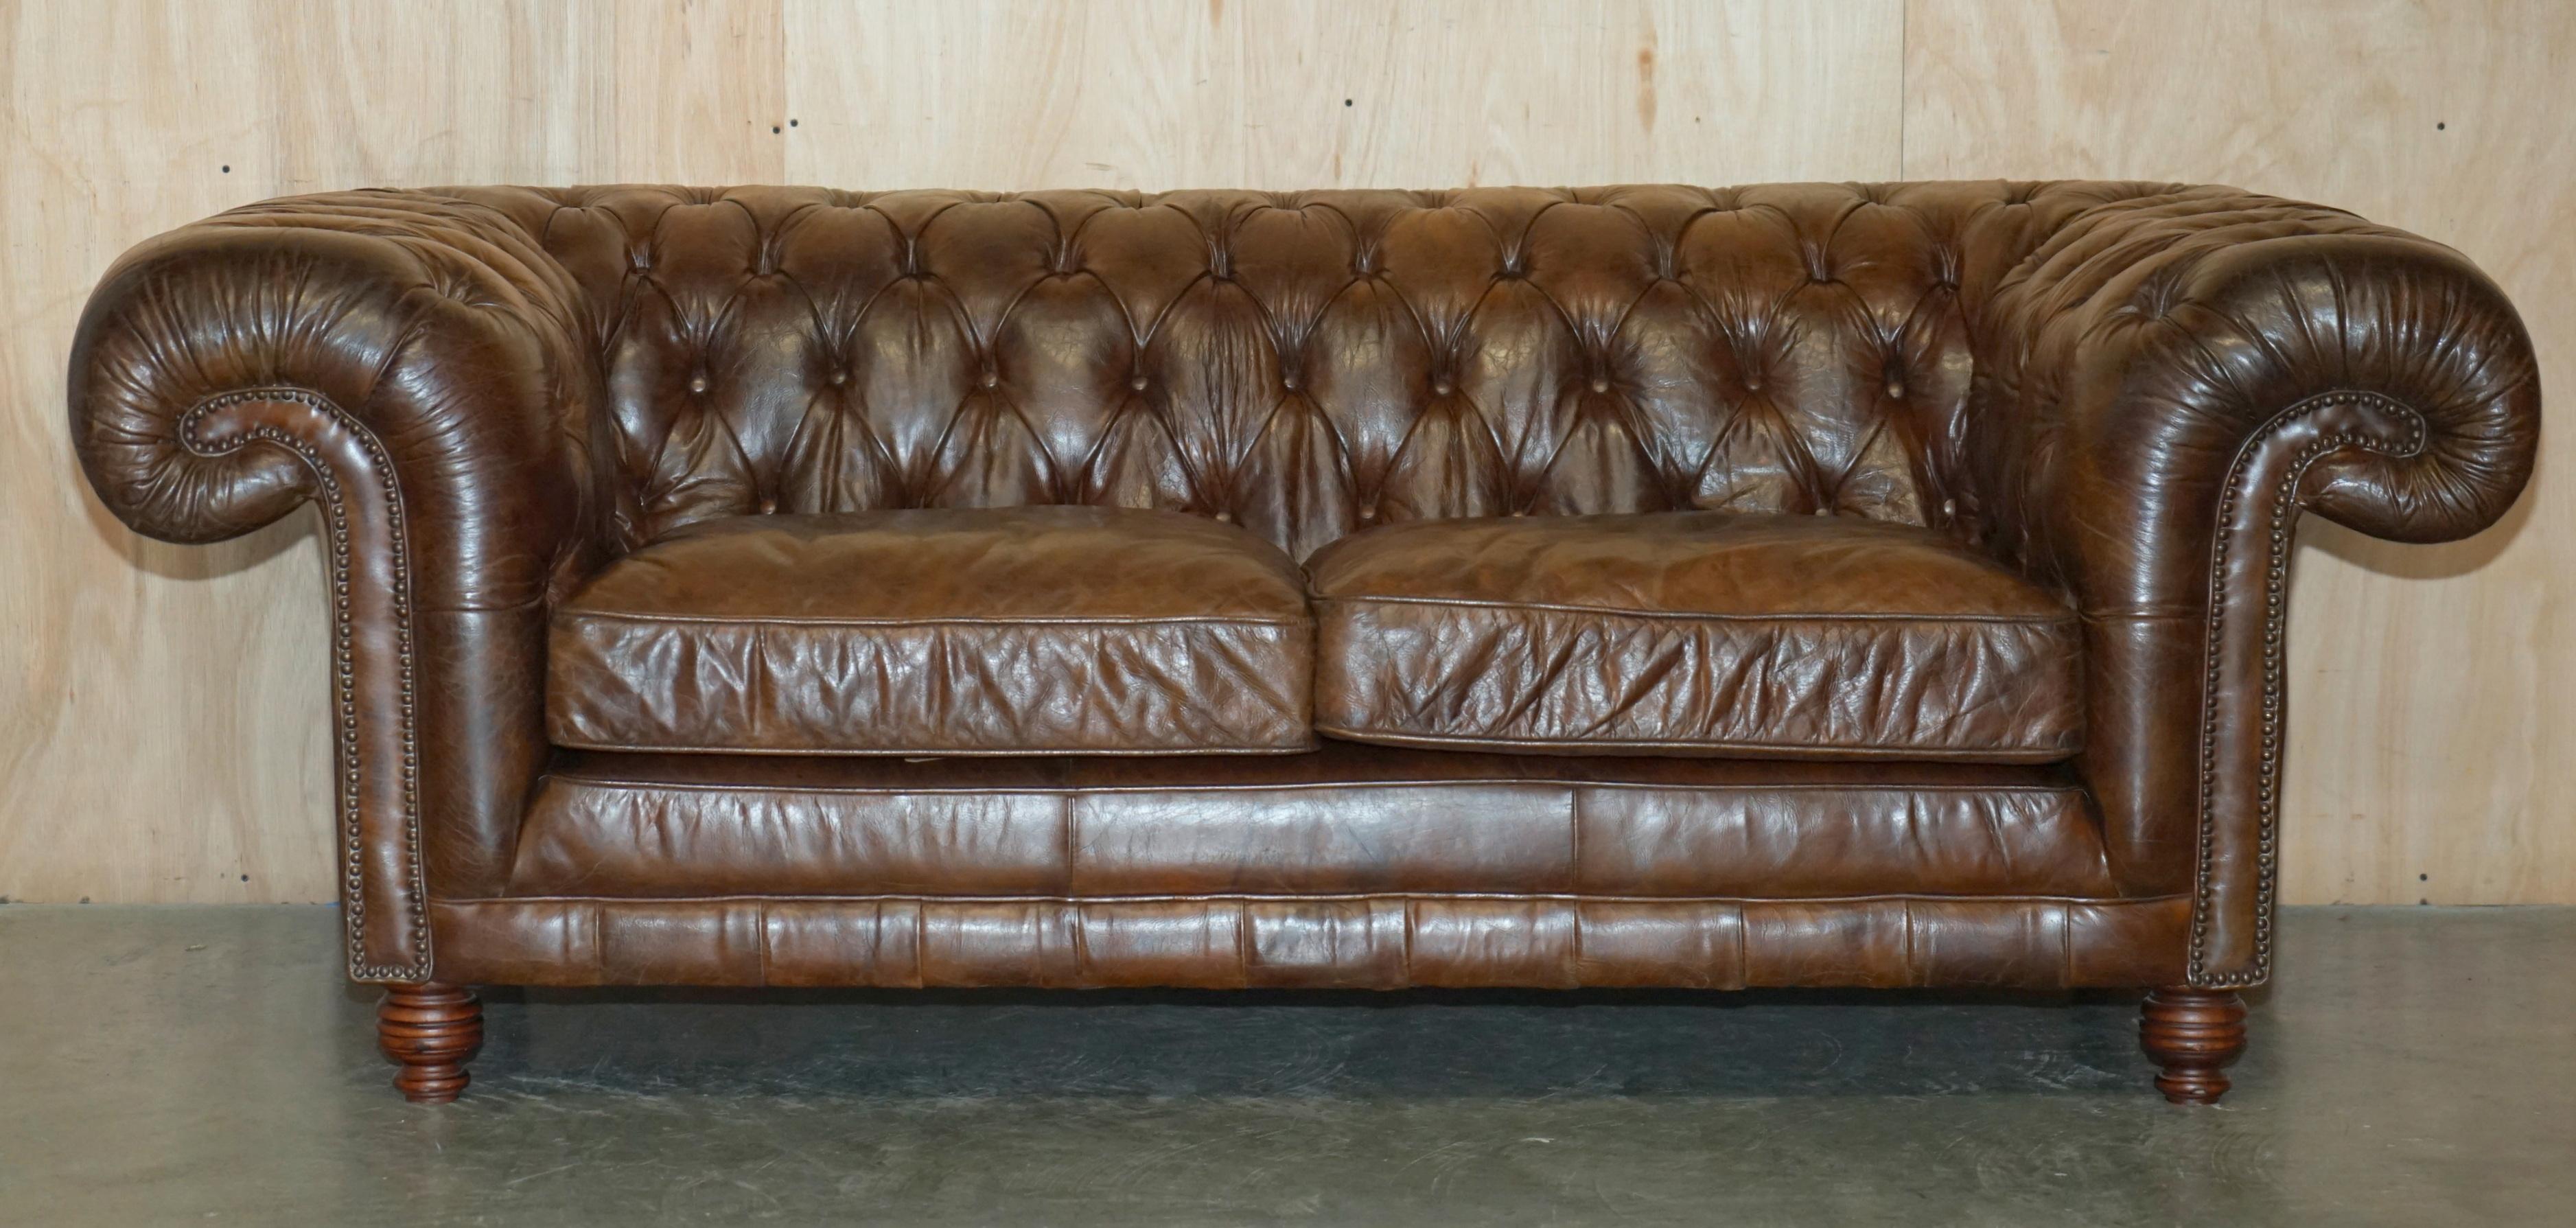 Royal House Antiques

Royal House Antiques is delighted to offer for sale this super comfortable, Timothy Oulton Designed, over sized Heritage brown leather Chesterfield sofa that is one of a pair 

Please note the delivery fee listed is just a